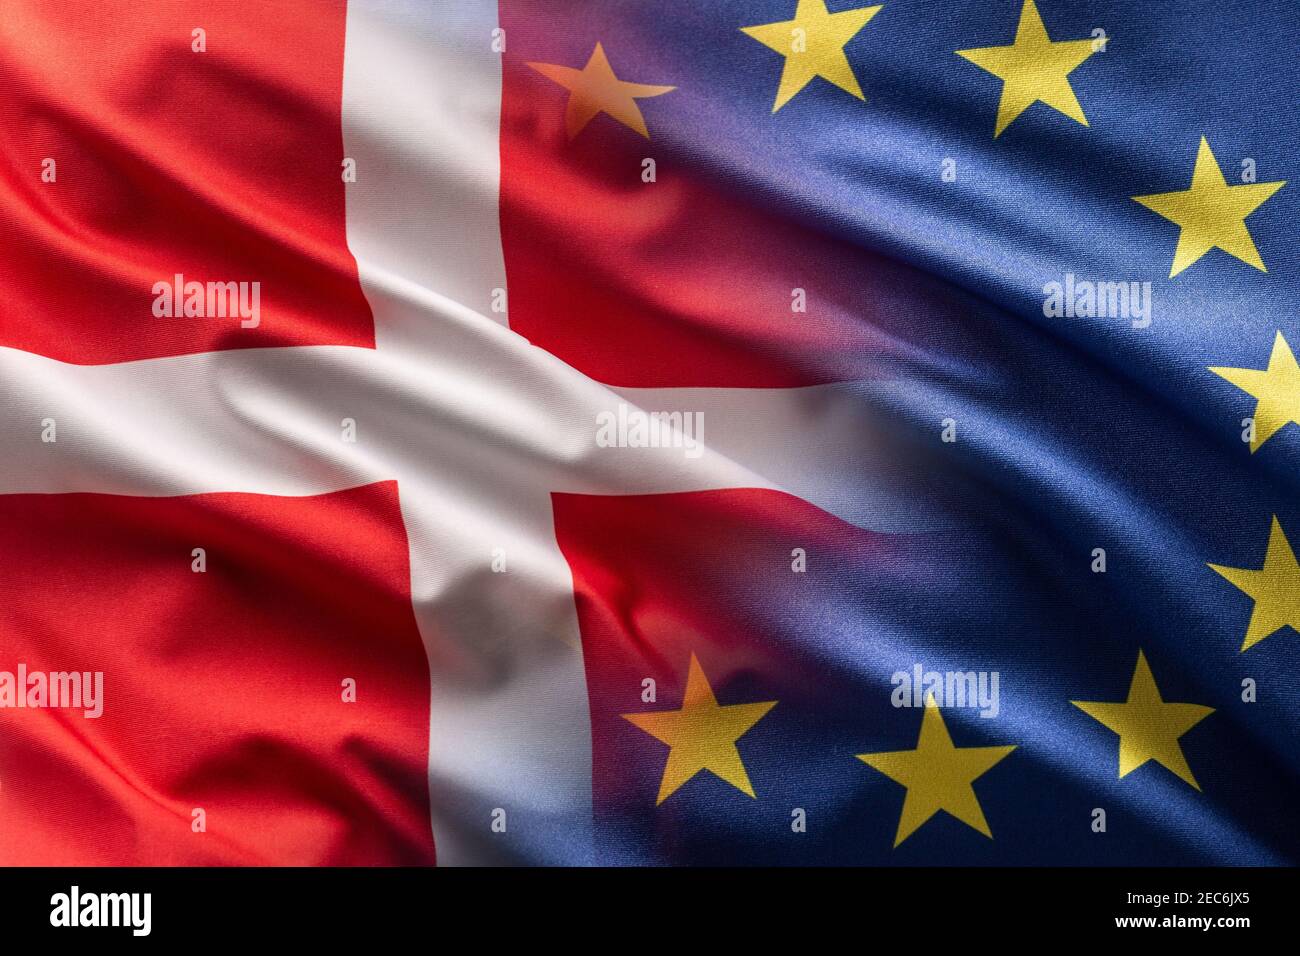 Flags of Denmark and EU blowing in the wind. Stock Photo